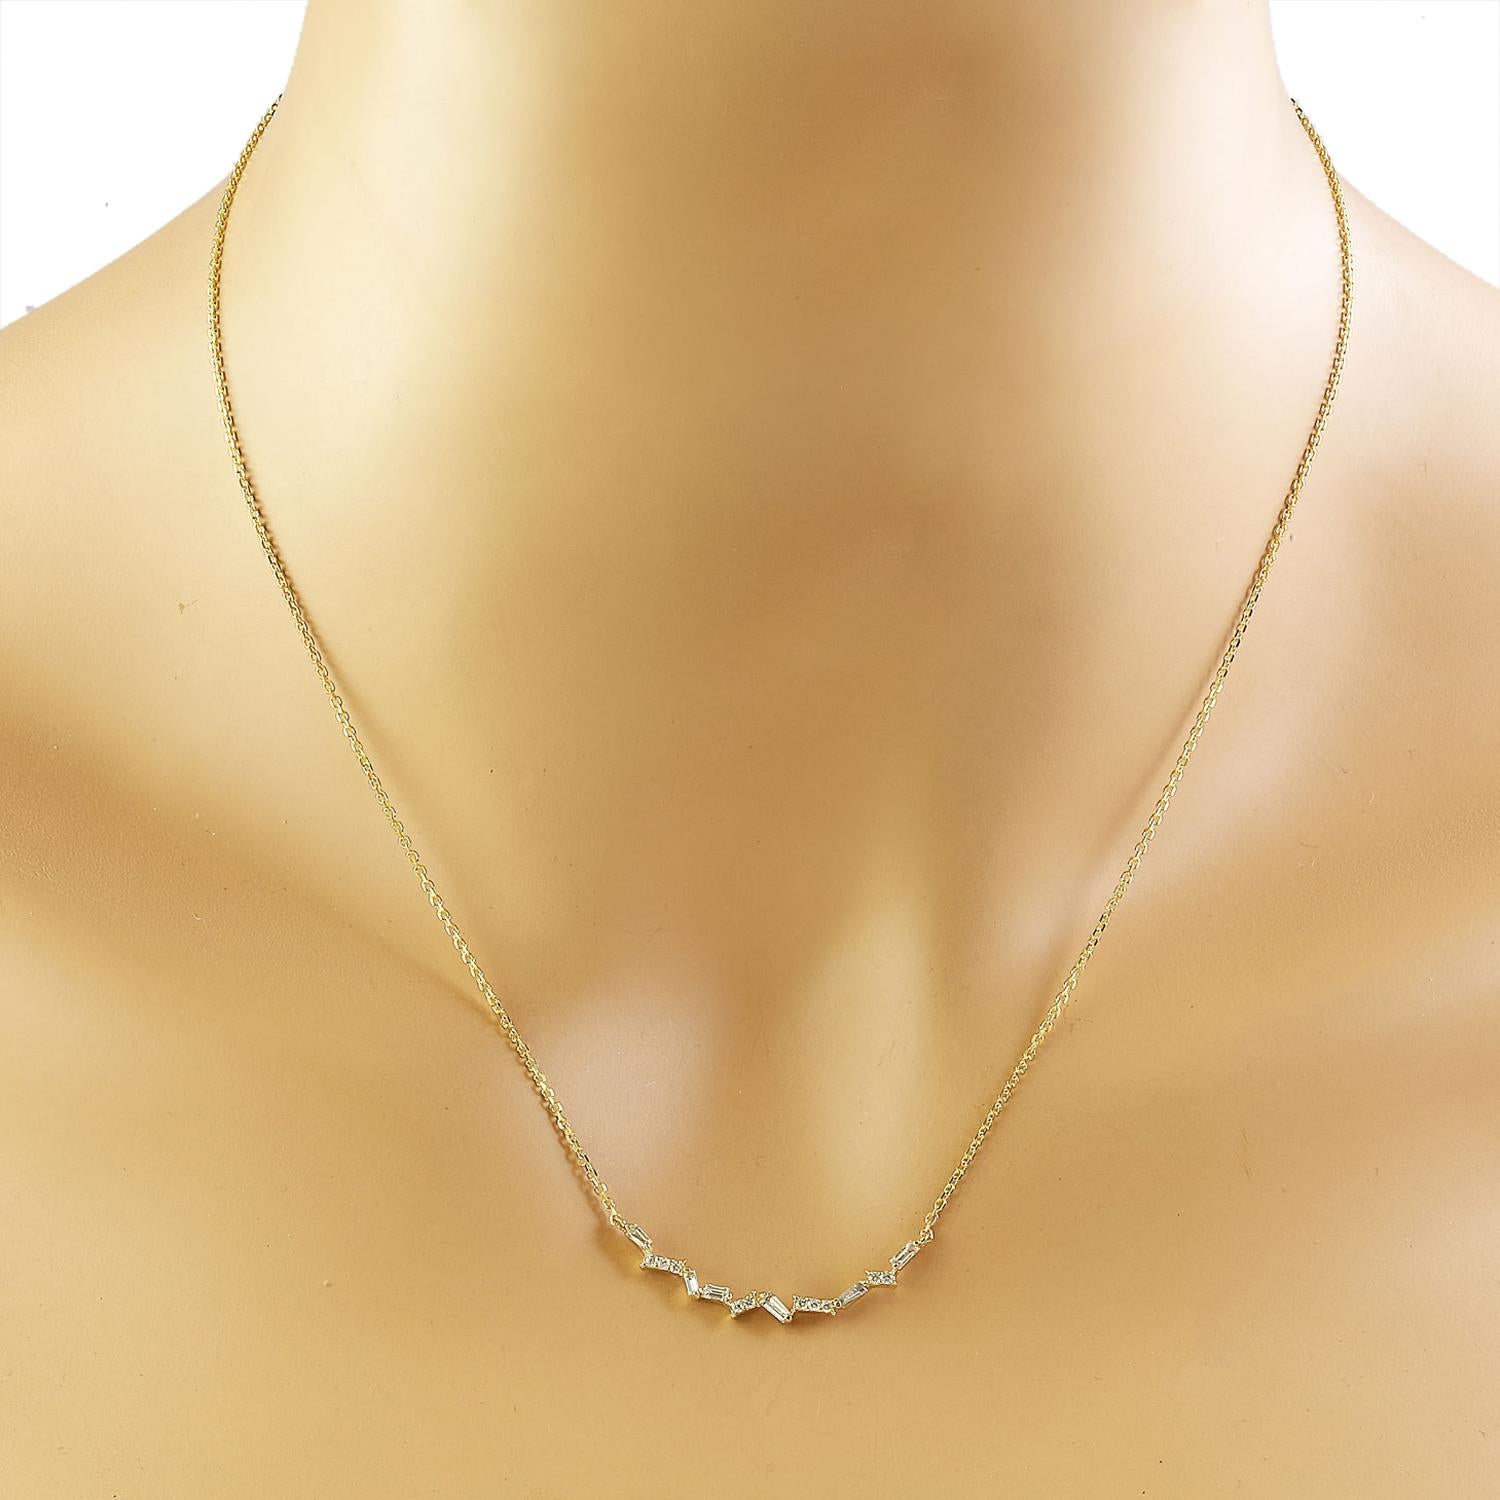 Baguette Cut Exquisite Natural Diamond Necklace In 14 Karat Yellow Gold  For Sale